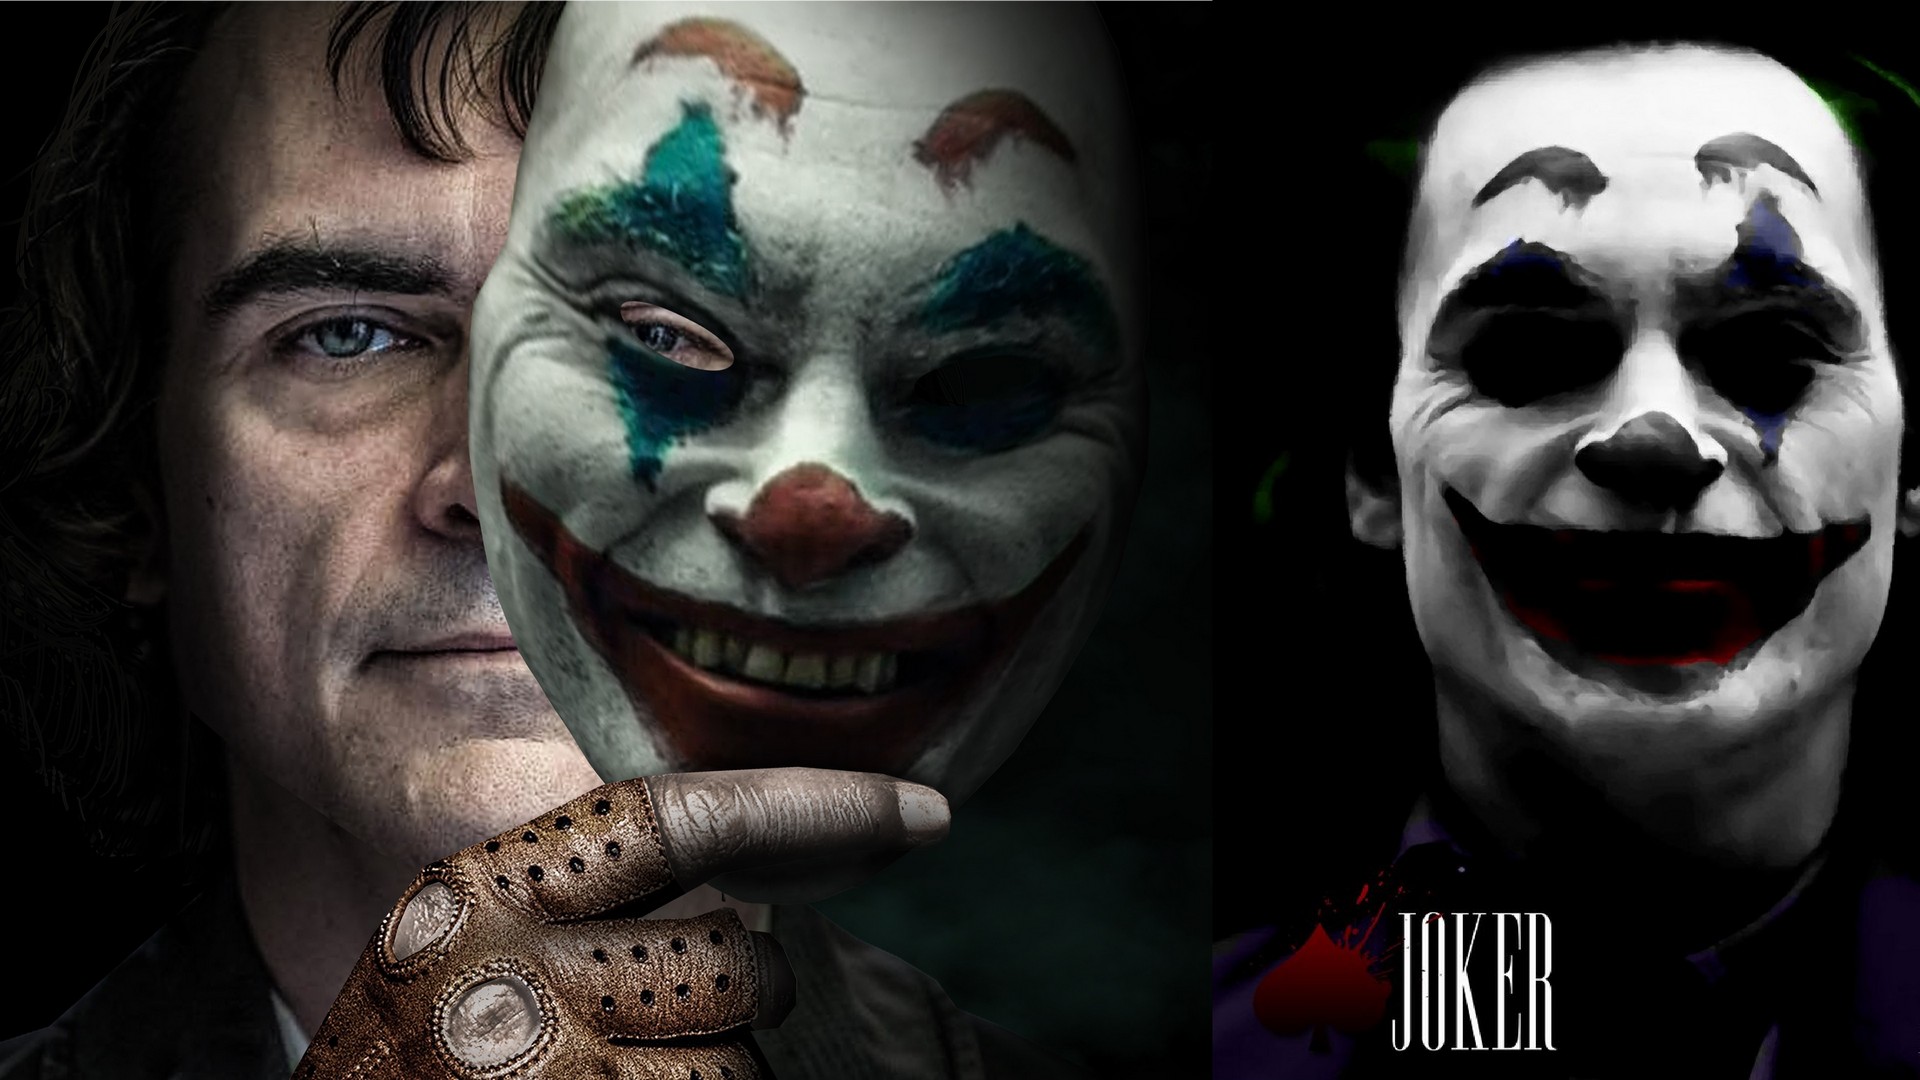 Joker 2019 Wallpaper with high-resolution 1920x1080 pixel. You can use this poster wallpaper for your Desktop Computers, Mac Screensavers, Windows Backgrounds, iPhone Wallpapers, Tablet or Android Lock screen and another Mobile device